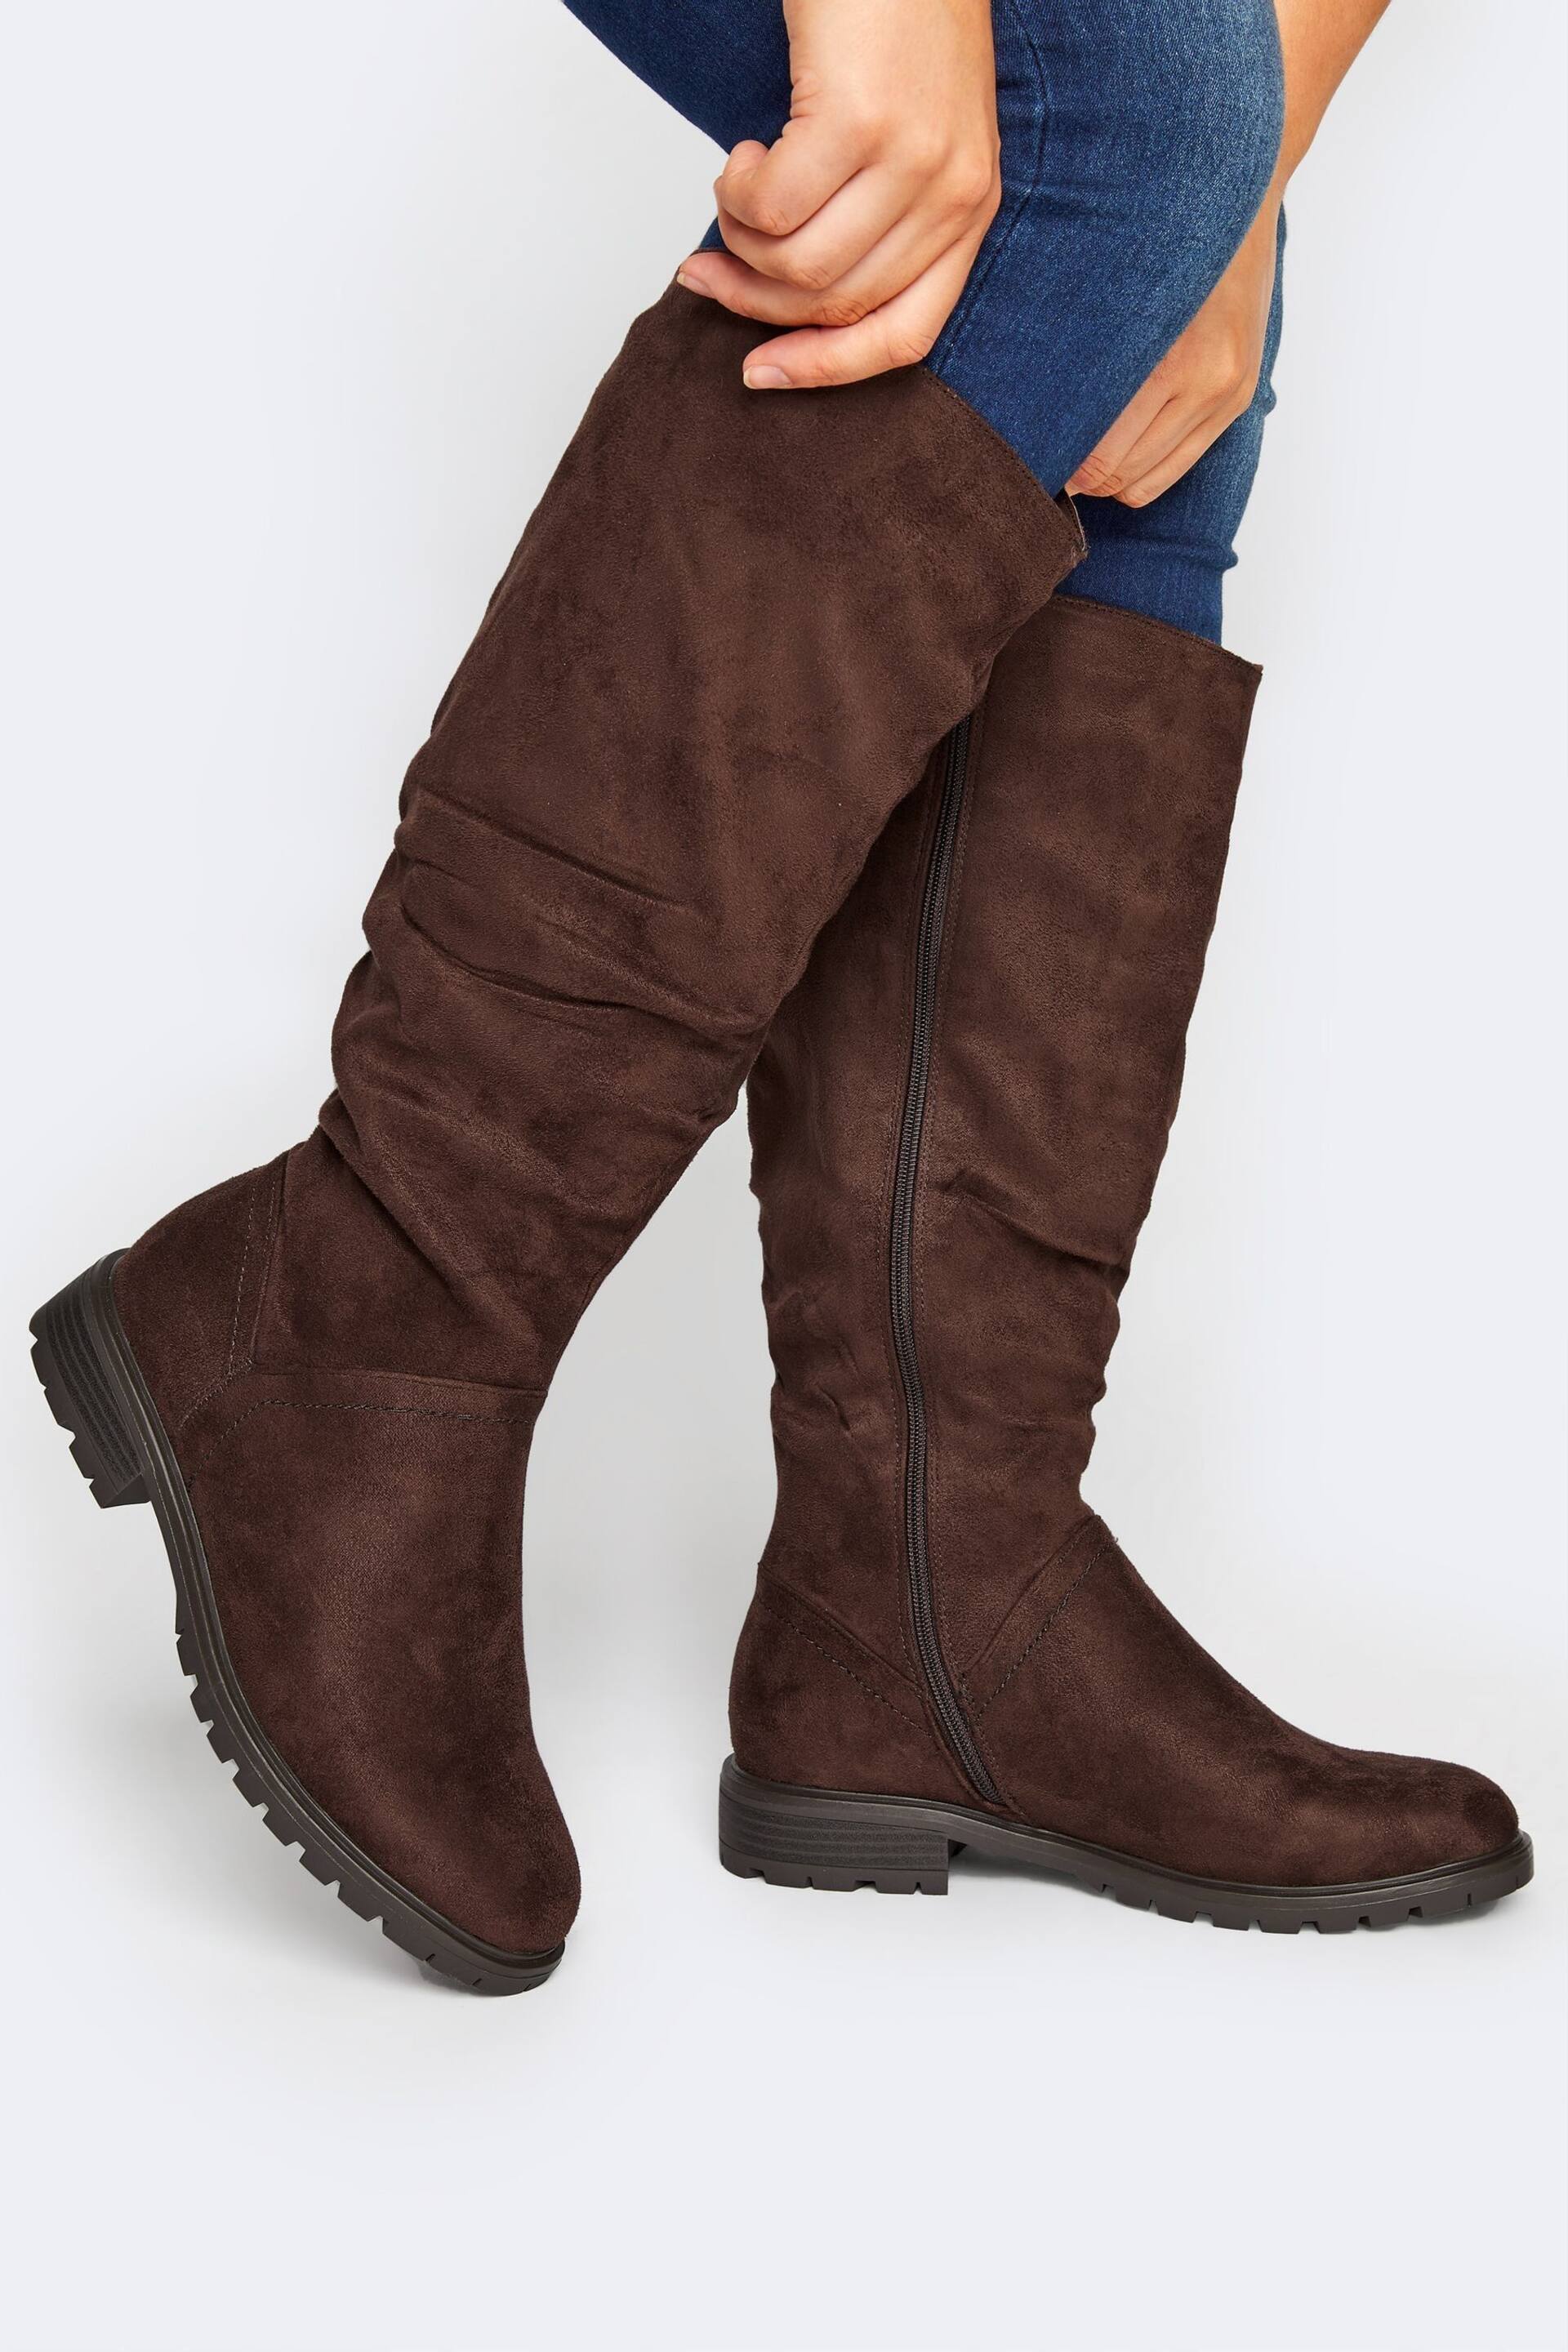 Yours Curve Brown Extra-Wide Fit Ruched Cleated Boots - Image 1 of 4